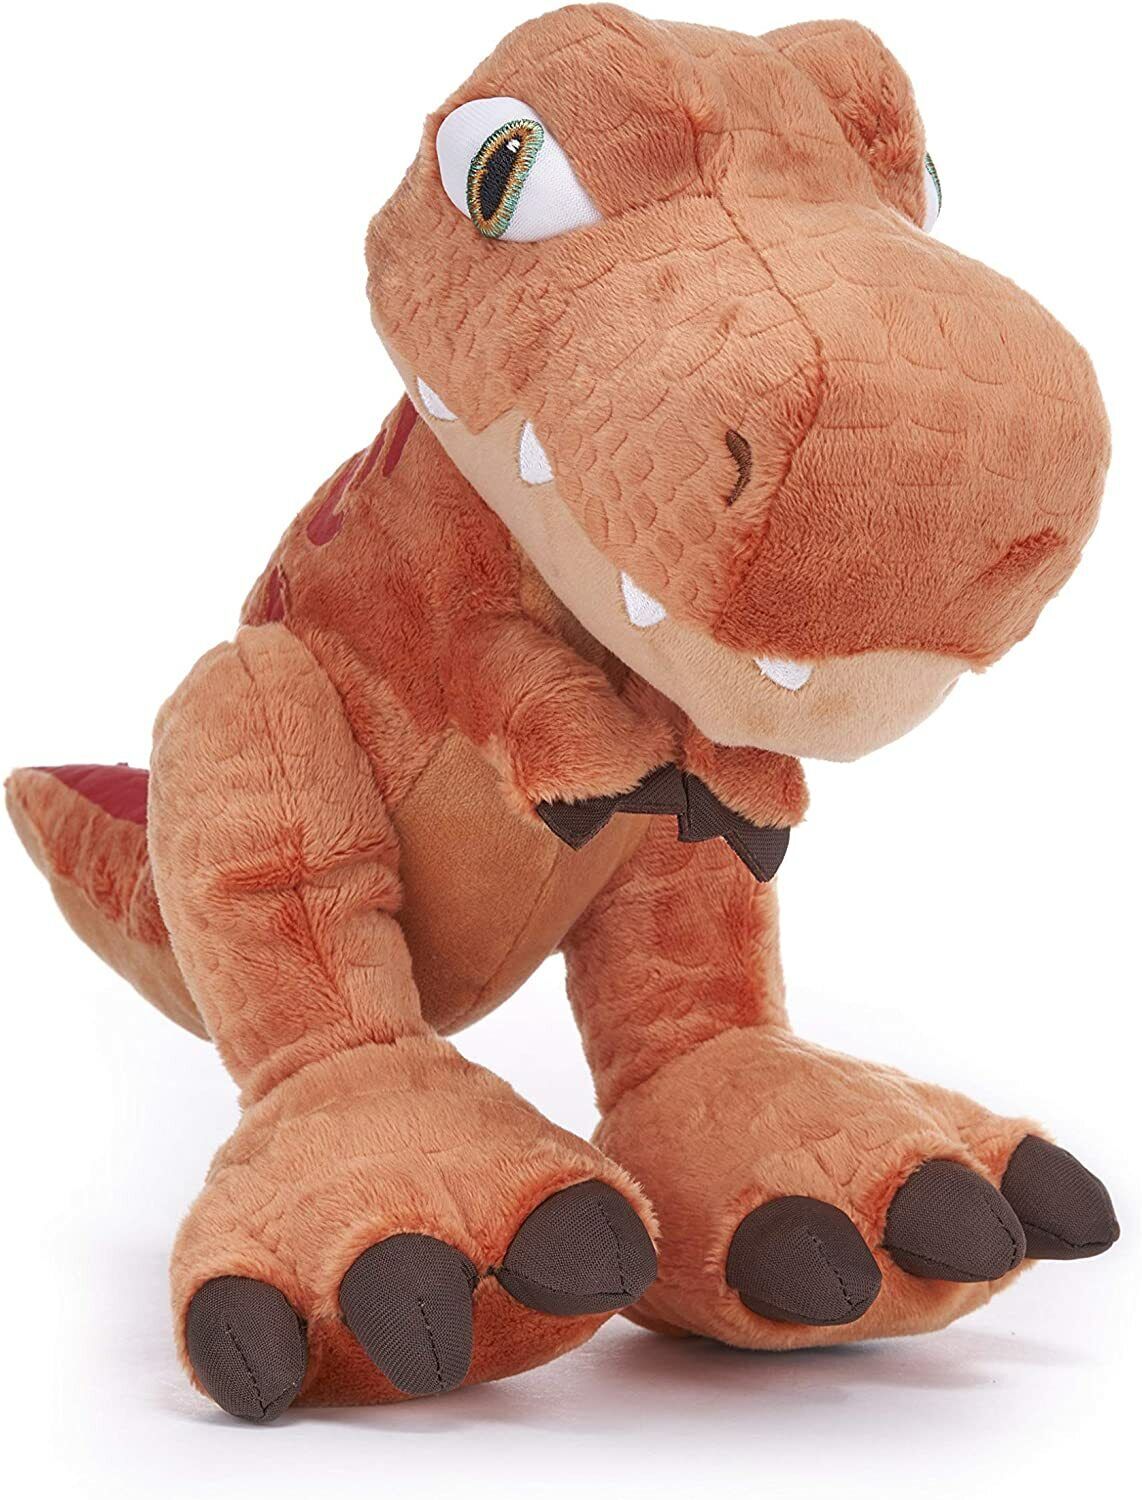 New Jurassic World 10" Chunky T-Rex Plush - Perfect Gift for Dino Fans!